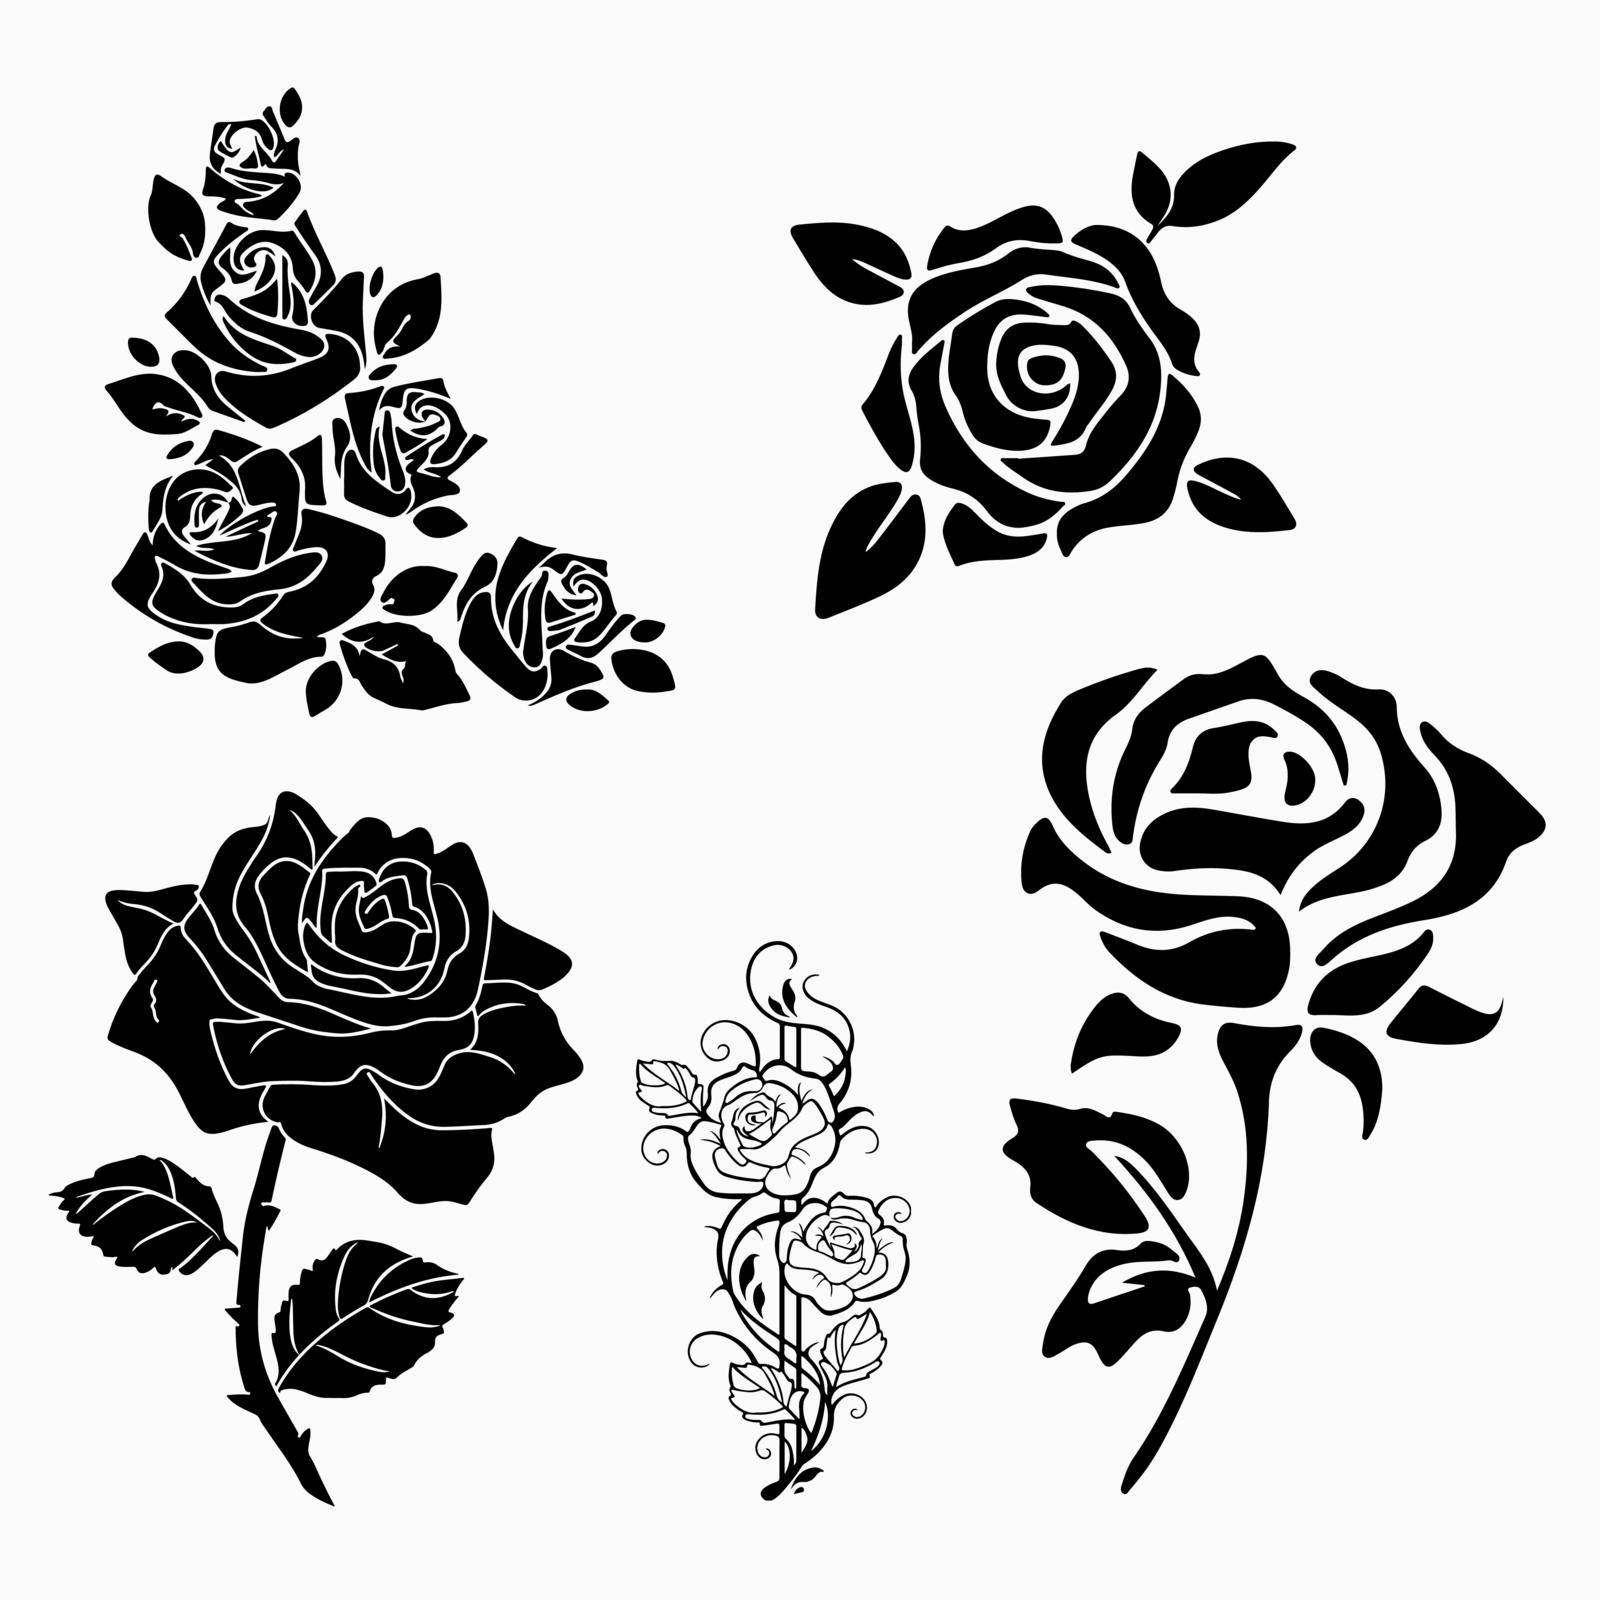 Solid icons for rose flower and shadow,vector illustrations